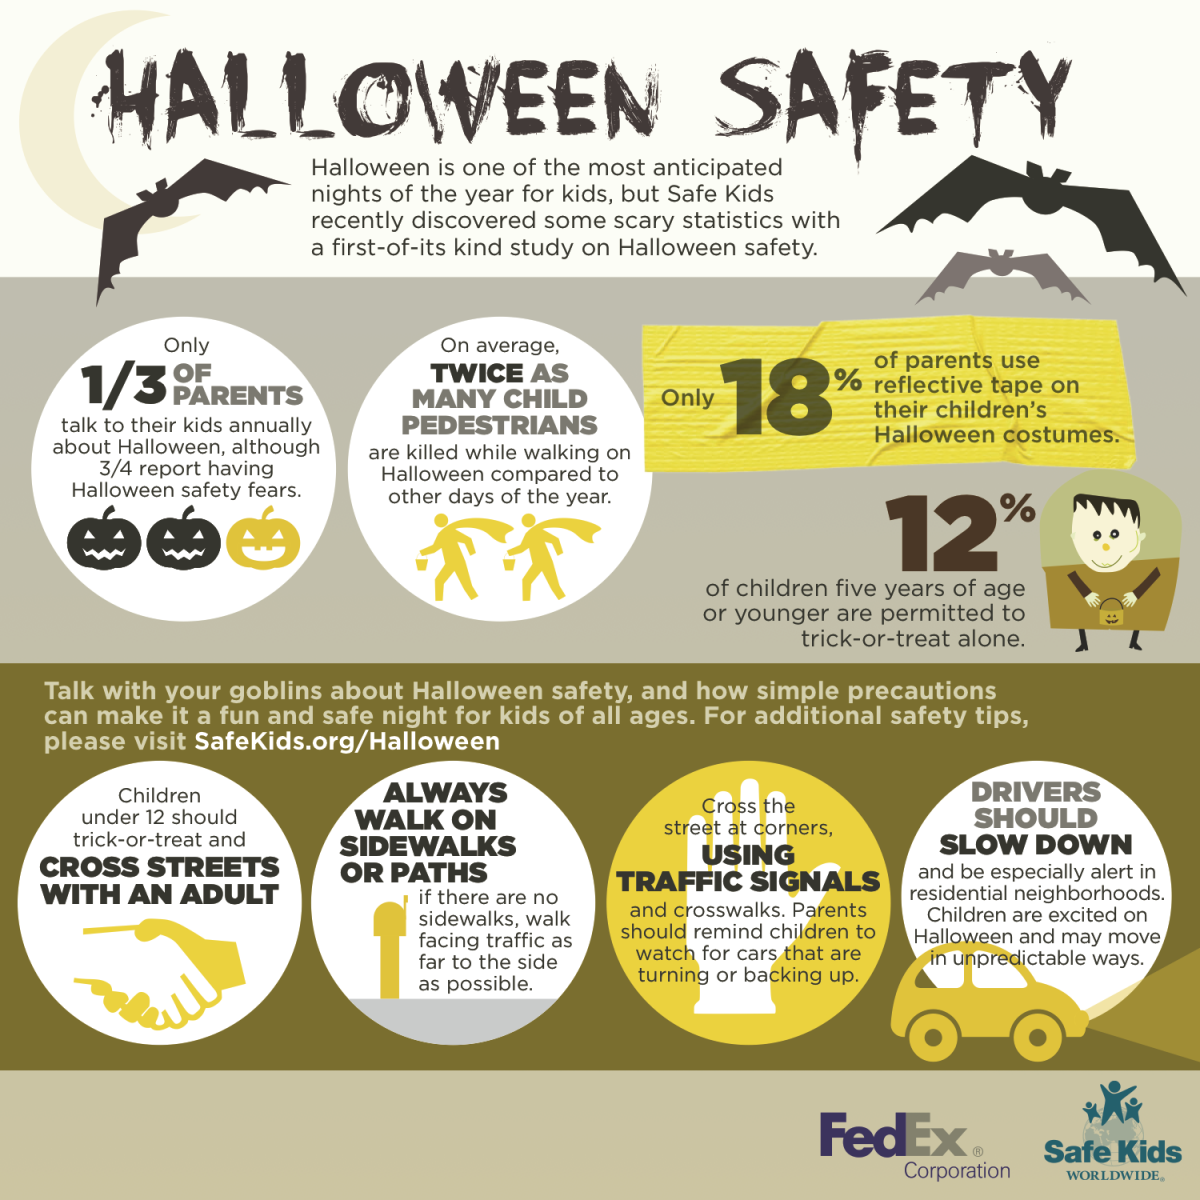 Image: Tips for a safe & spooky Halloween